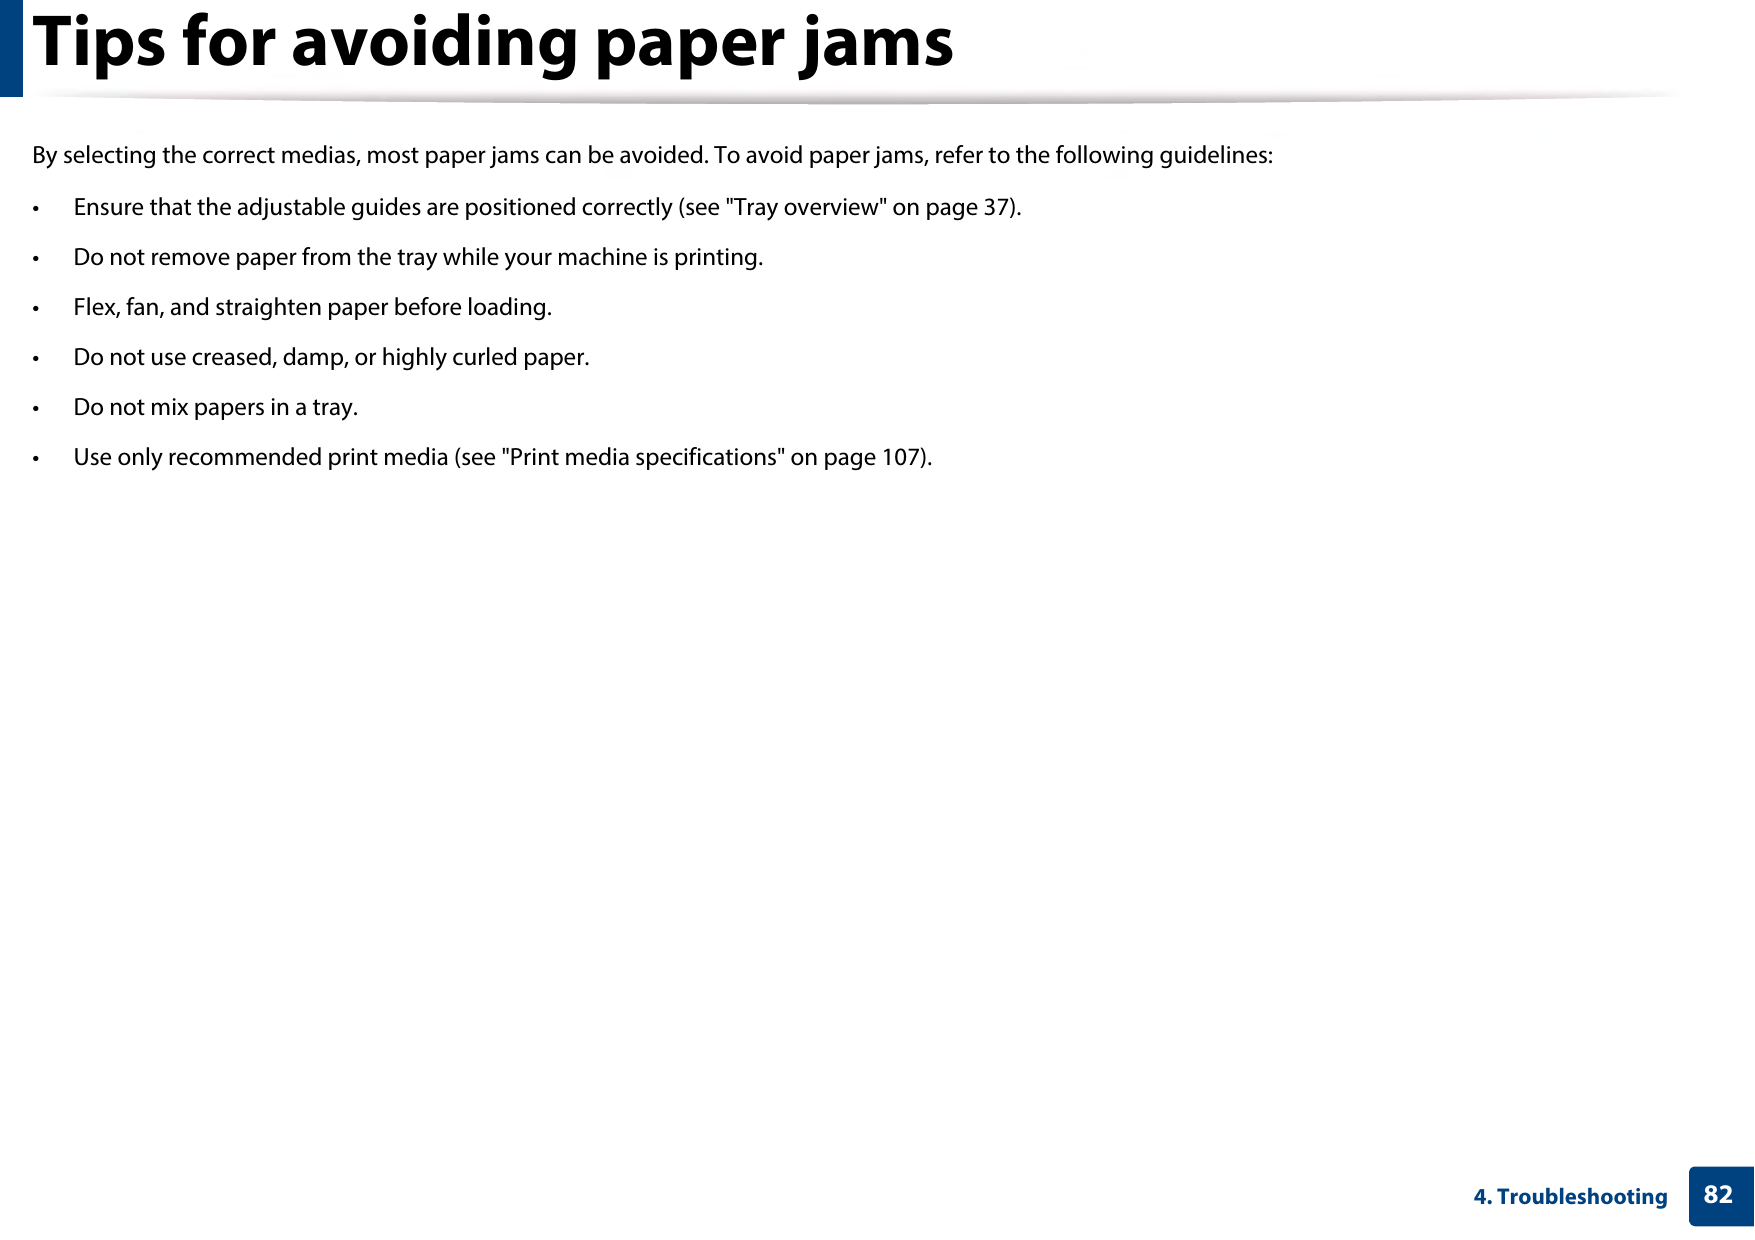 824. TroubleshootingTips for avoiding paper jamsBy selecting the correct medias, most paper jams can be avoided. To avoid paper jams, refer to the following guidelines:• Ensure that the adjustable guides are positioned correctly (see &quot;Tray overview&quot; on page 37).• Do not remove paper from the tray while your machine is printing.• Flex, fan, and straighten paper before loading. • Do not use creased, damp, or highly curled paper.• Do not mix papers in a tray.• Use only recommended print media (see &quot;Print media specifications&quot; on page 107).